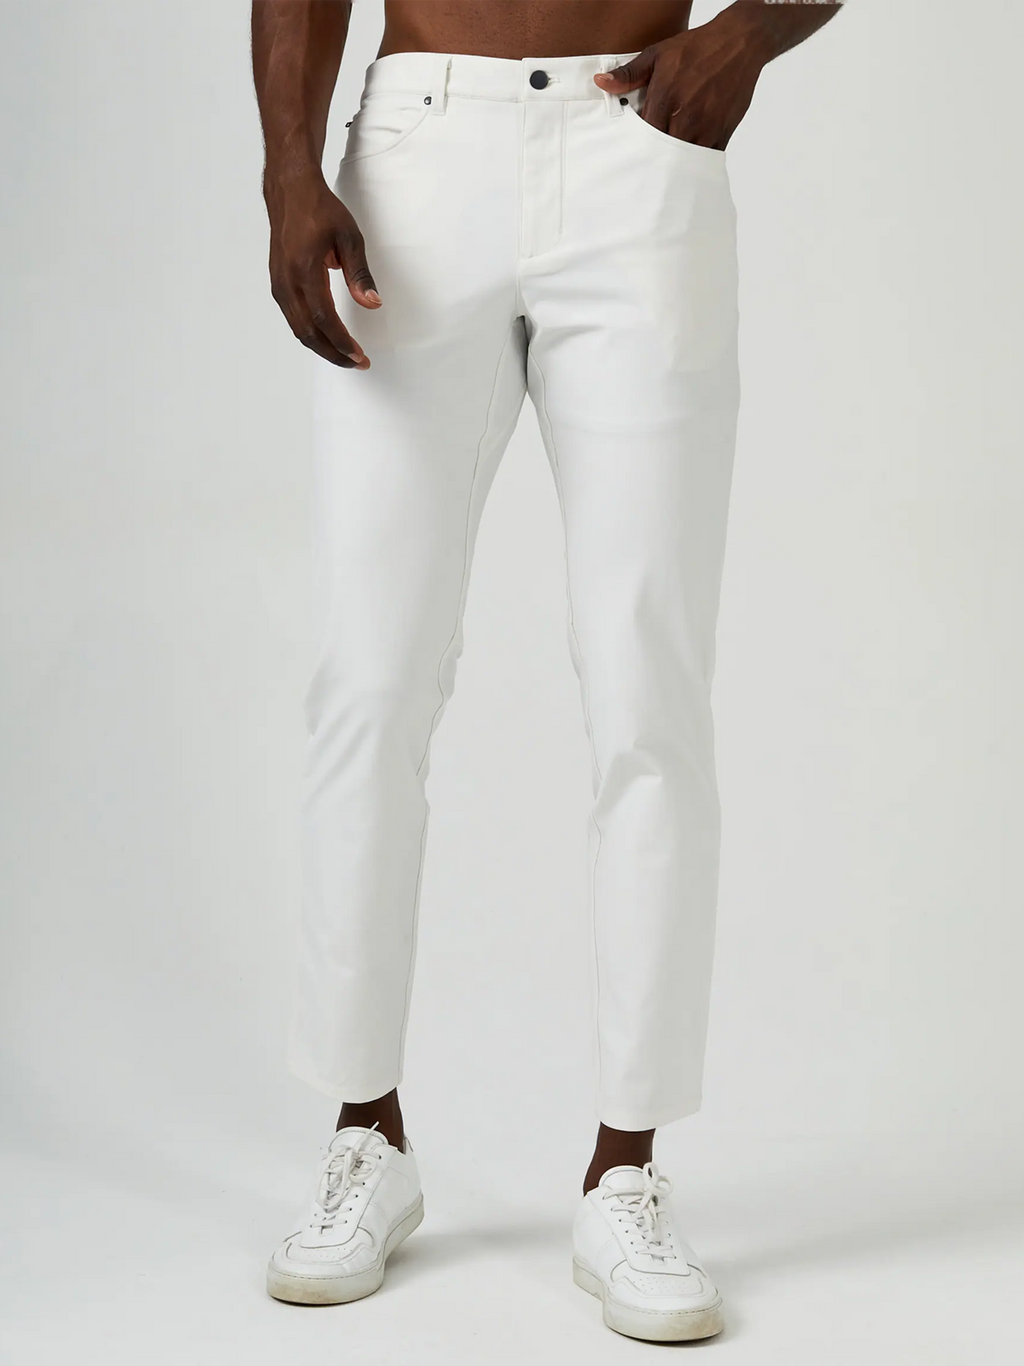 Infinity 7-Pocket Pant in Ivory